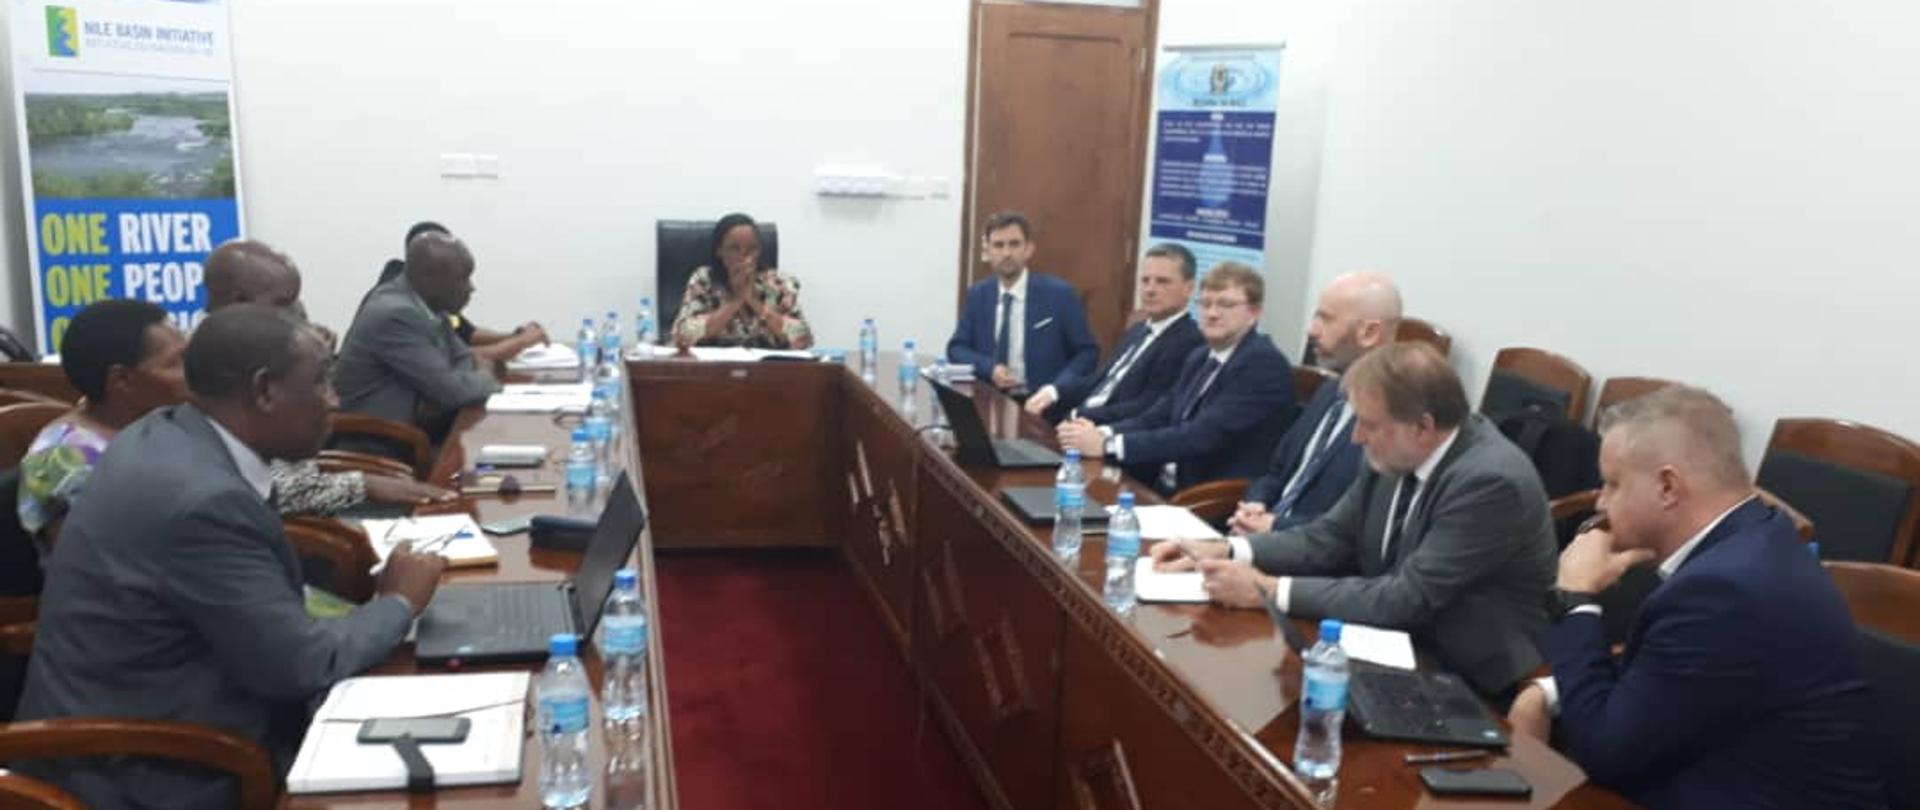 Meeting of Amb. Buzalski and companies with Minister of Water K. Mkumbo